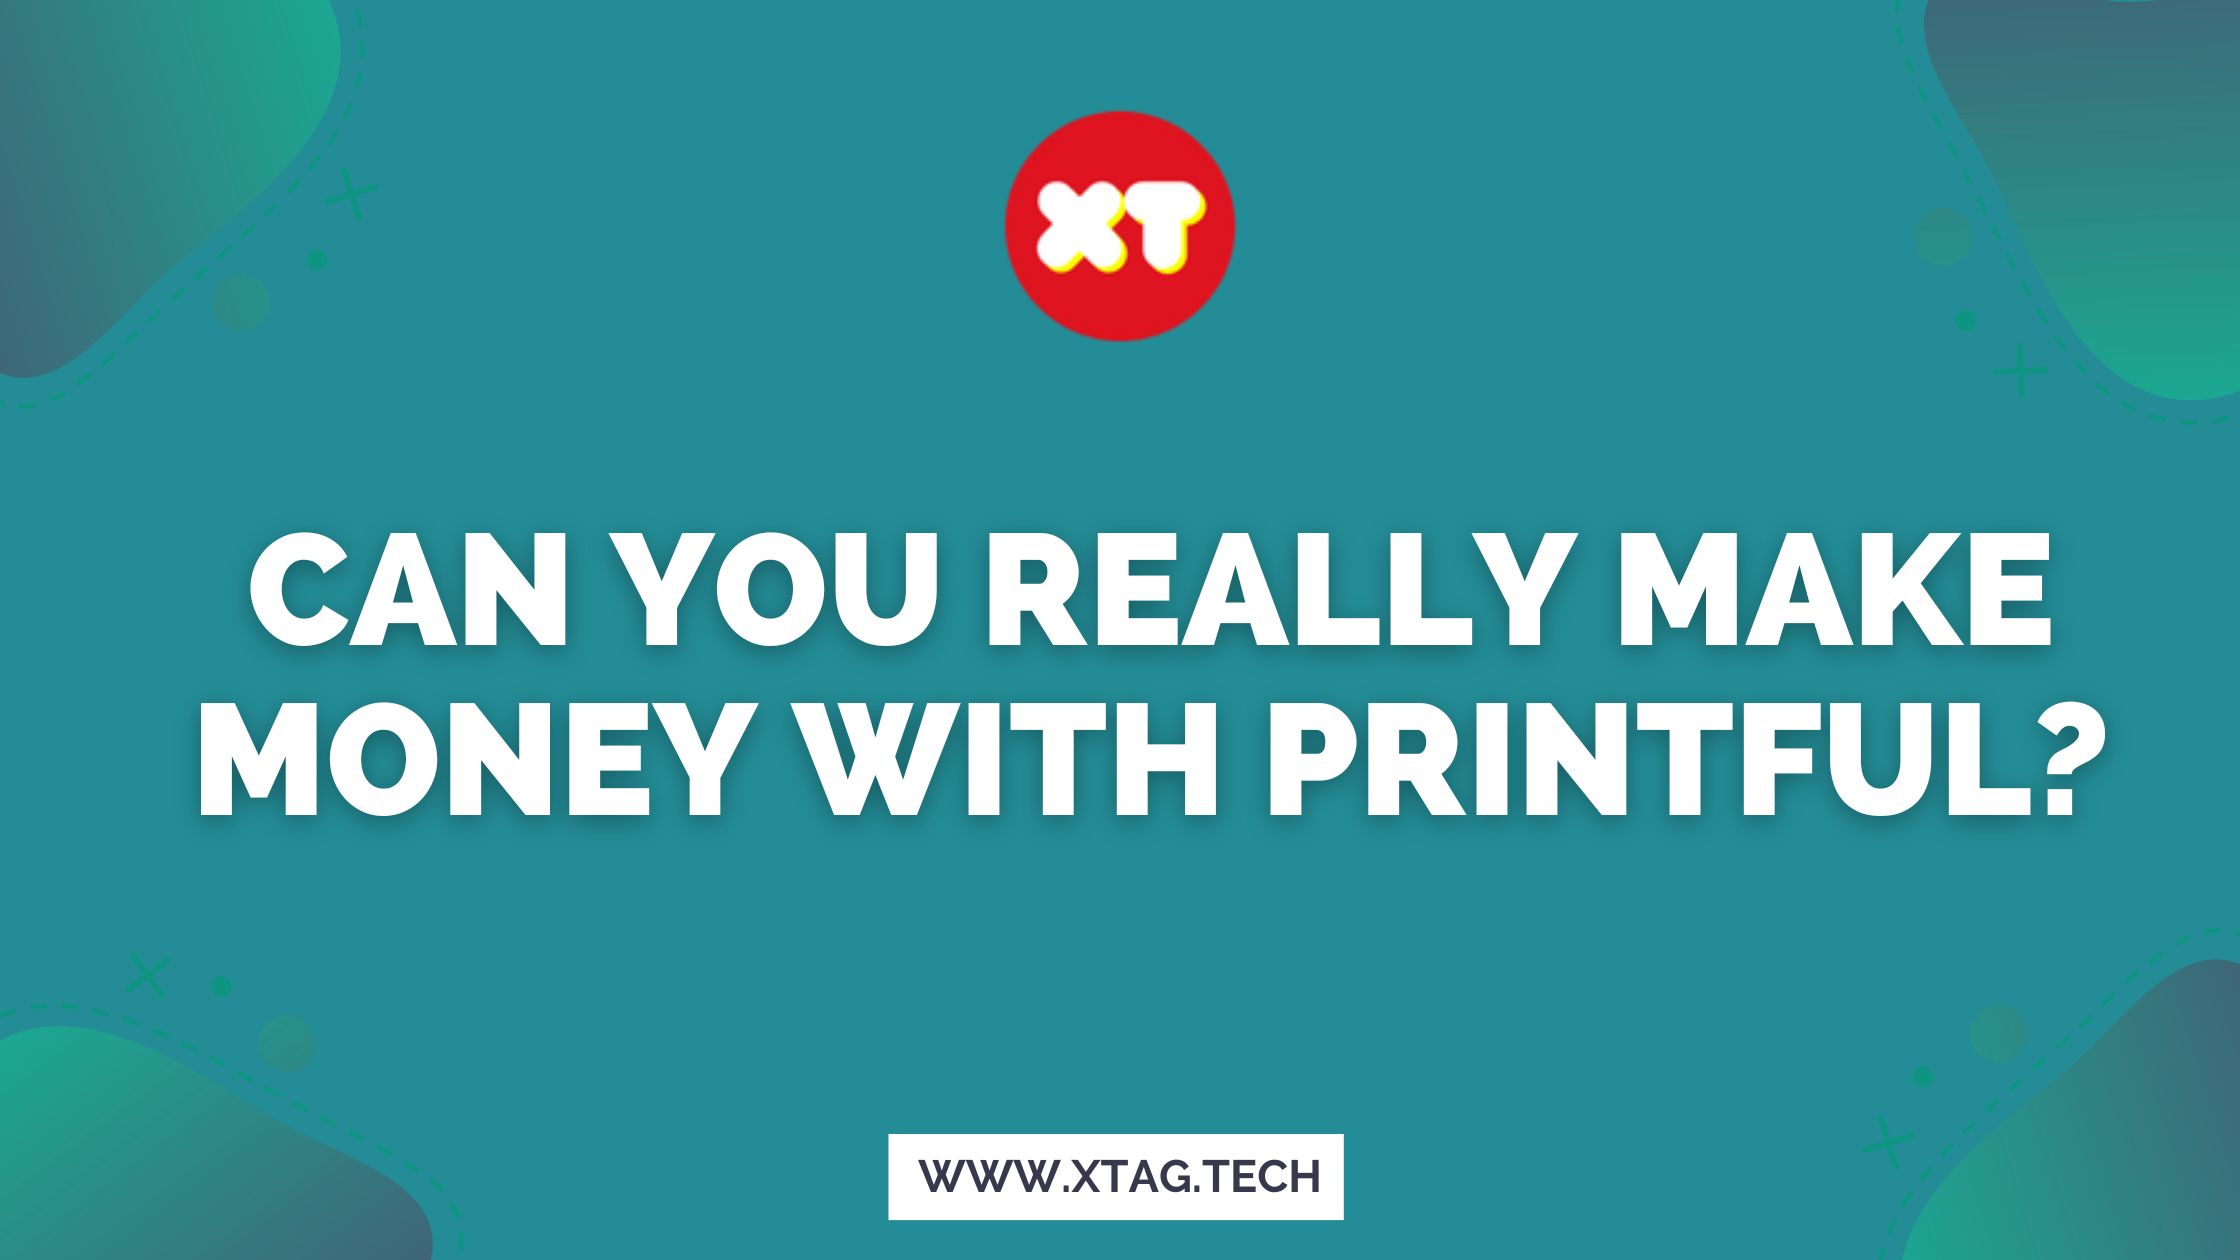 Can You Really Make Money With Printful?